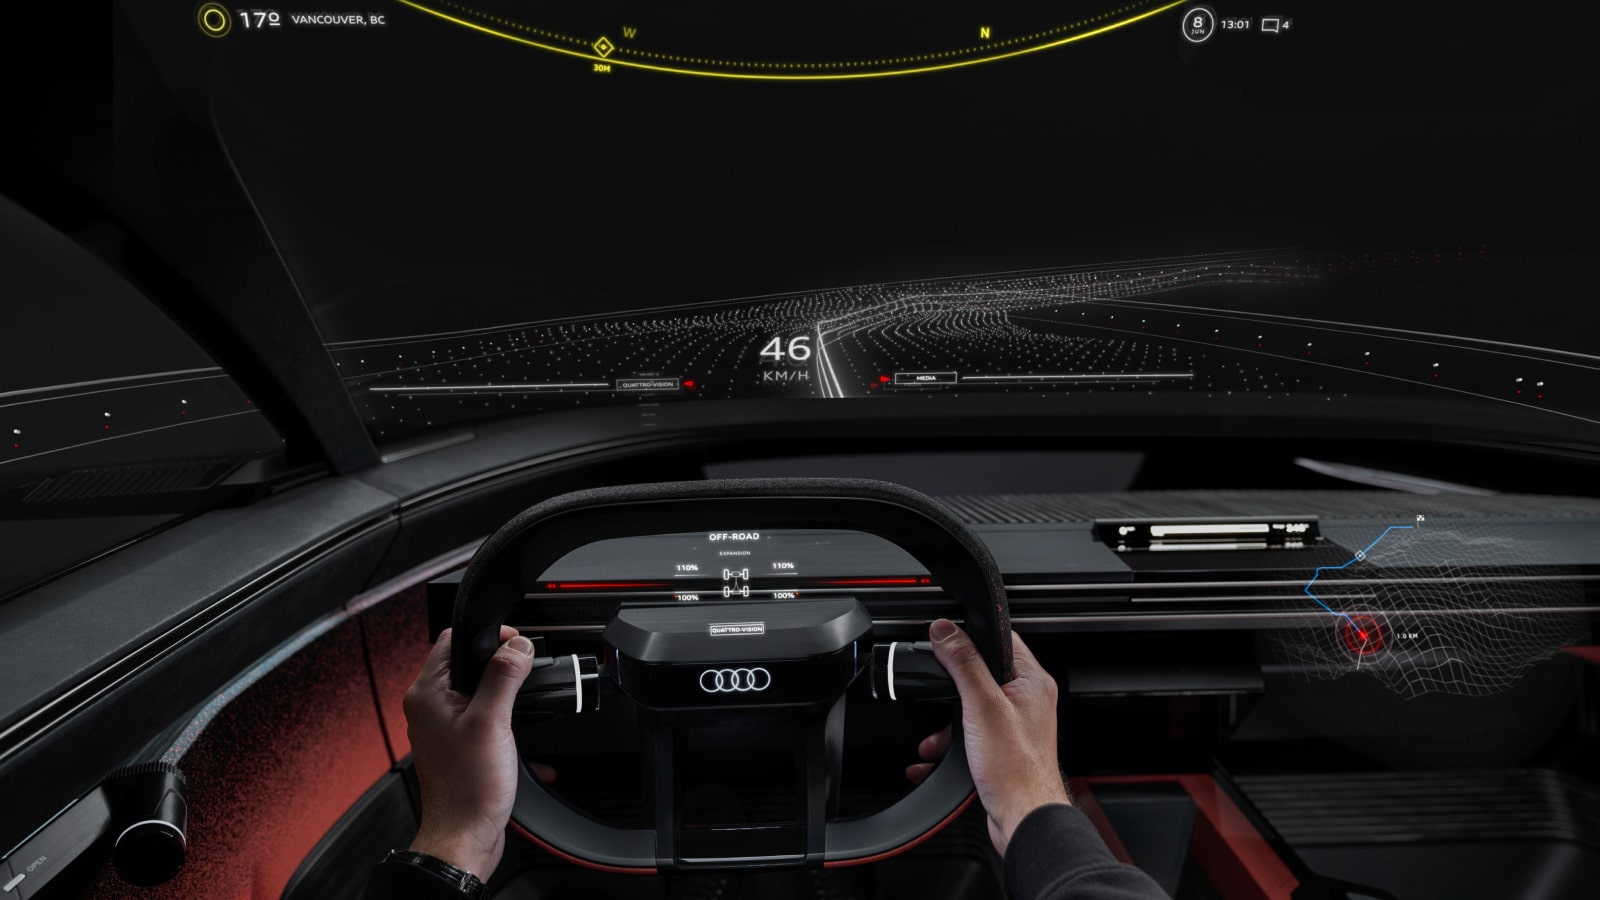 Audi Activesphere Augmented Reality screen, mapping the route out in front of the driver